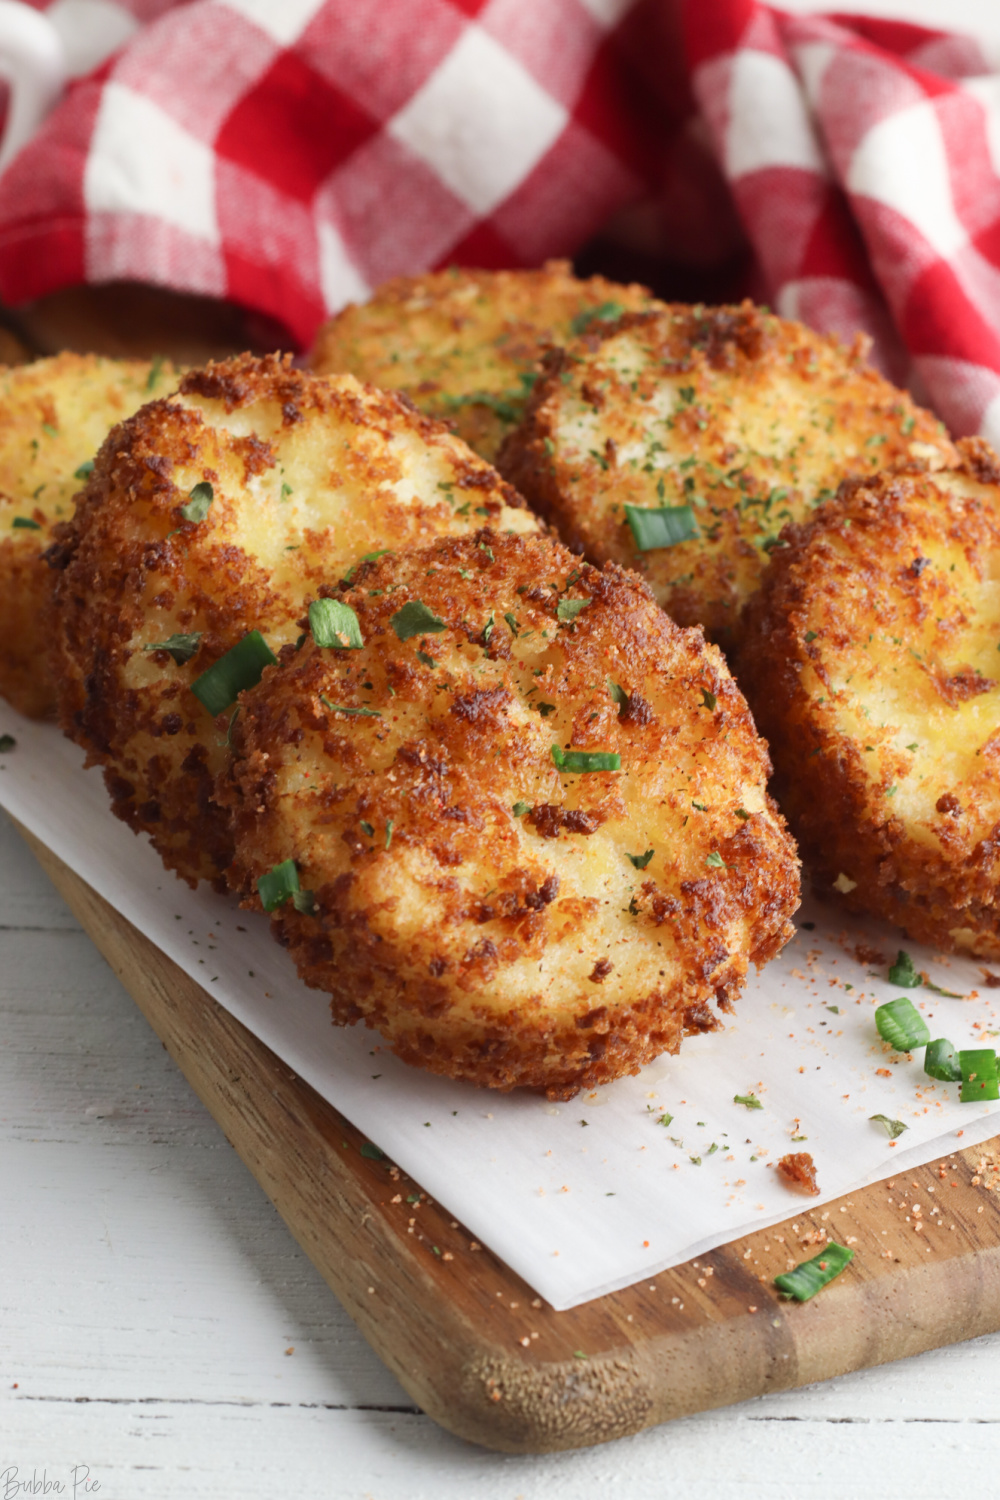 Fried Grit Cakes made with cheese